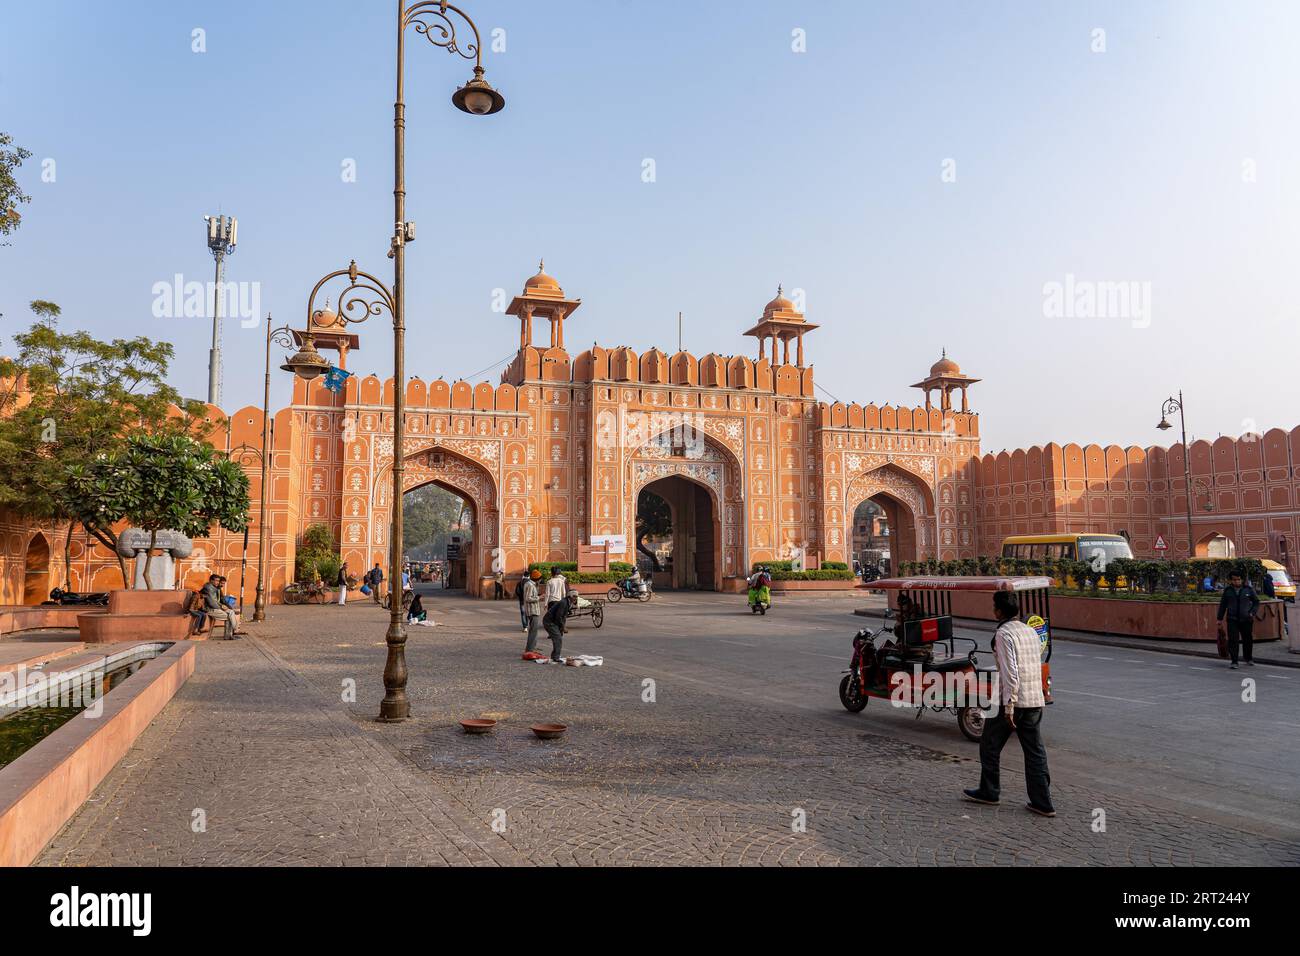 Jaipur, India, December 11, 2019: Ajmeri Gate, a pink city gate to the historical city centre Stock Photo